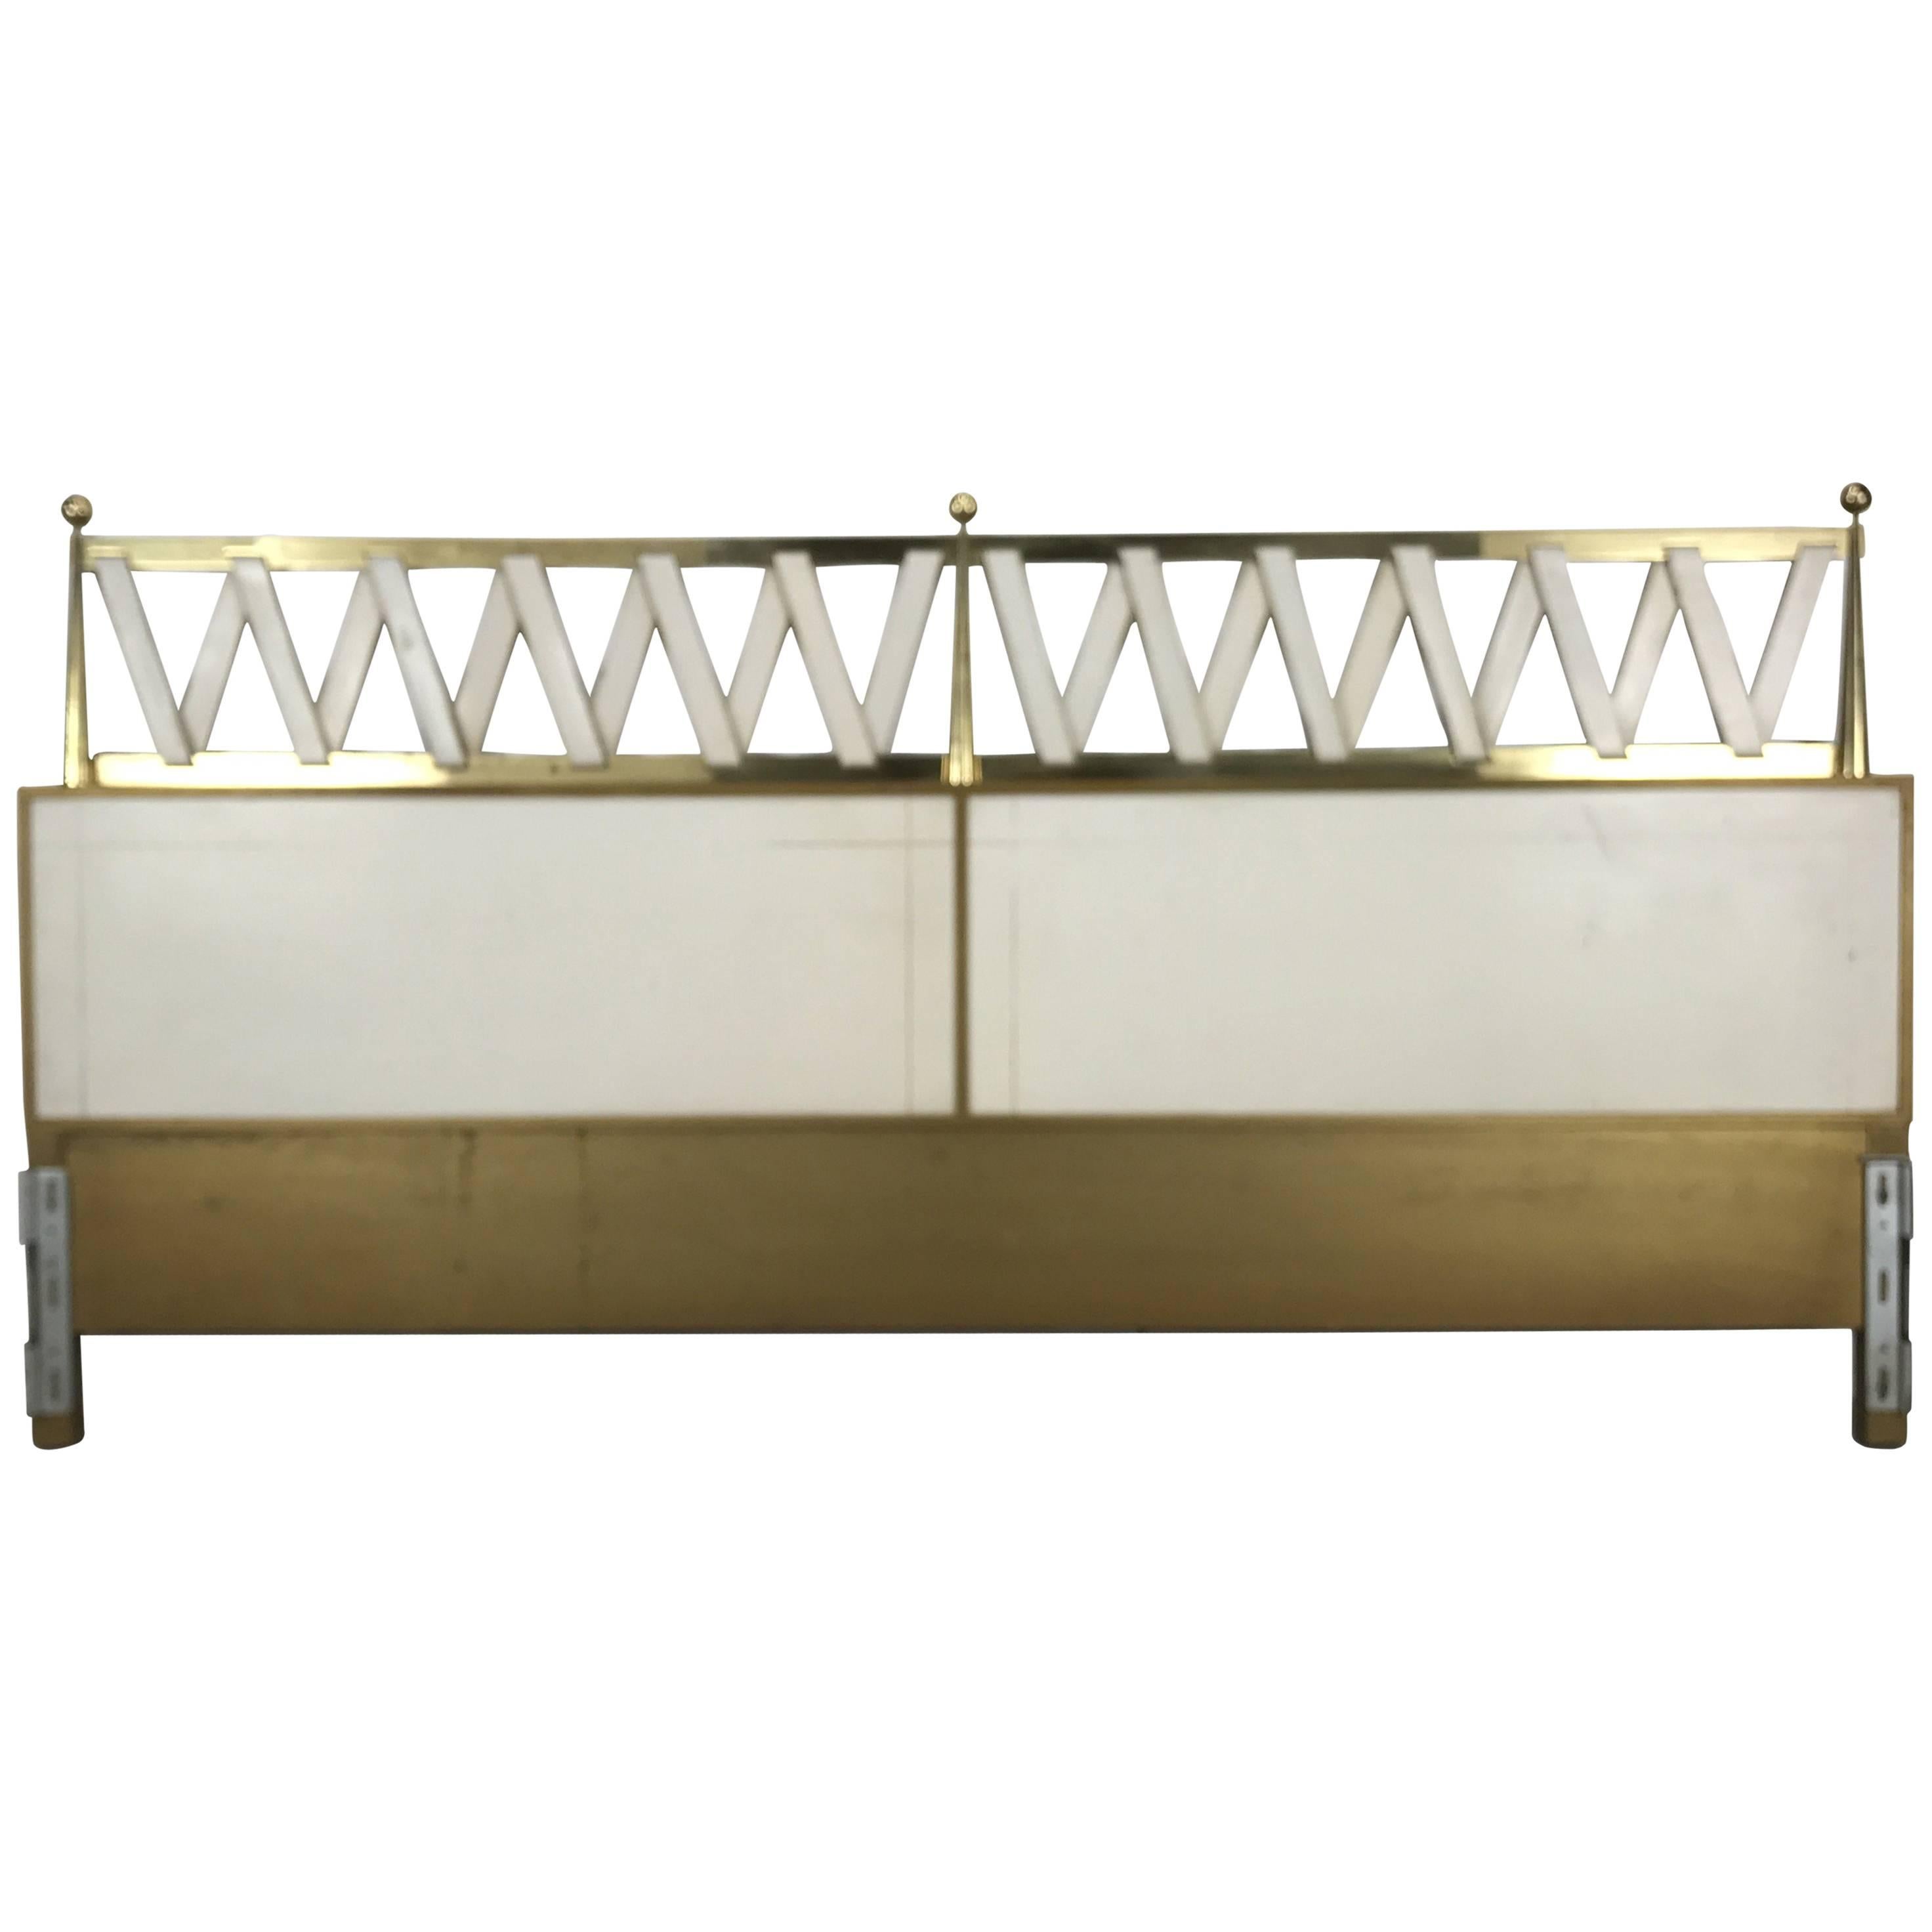 Hollywood Regency King Size Headboard, Leather and Brass, in Style of Parzinger